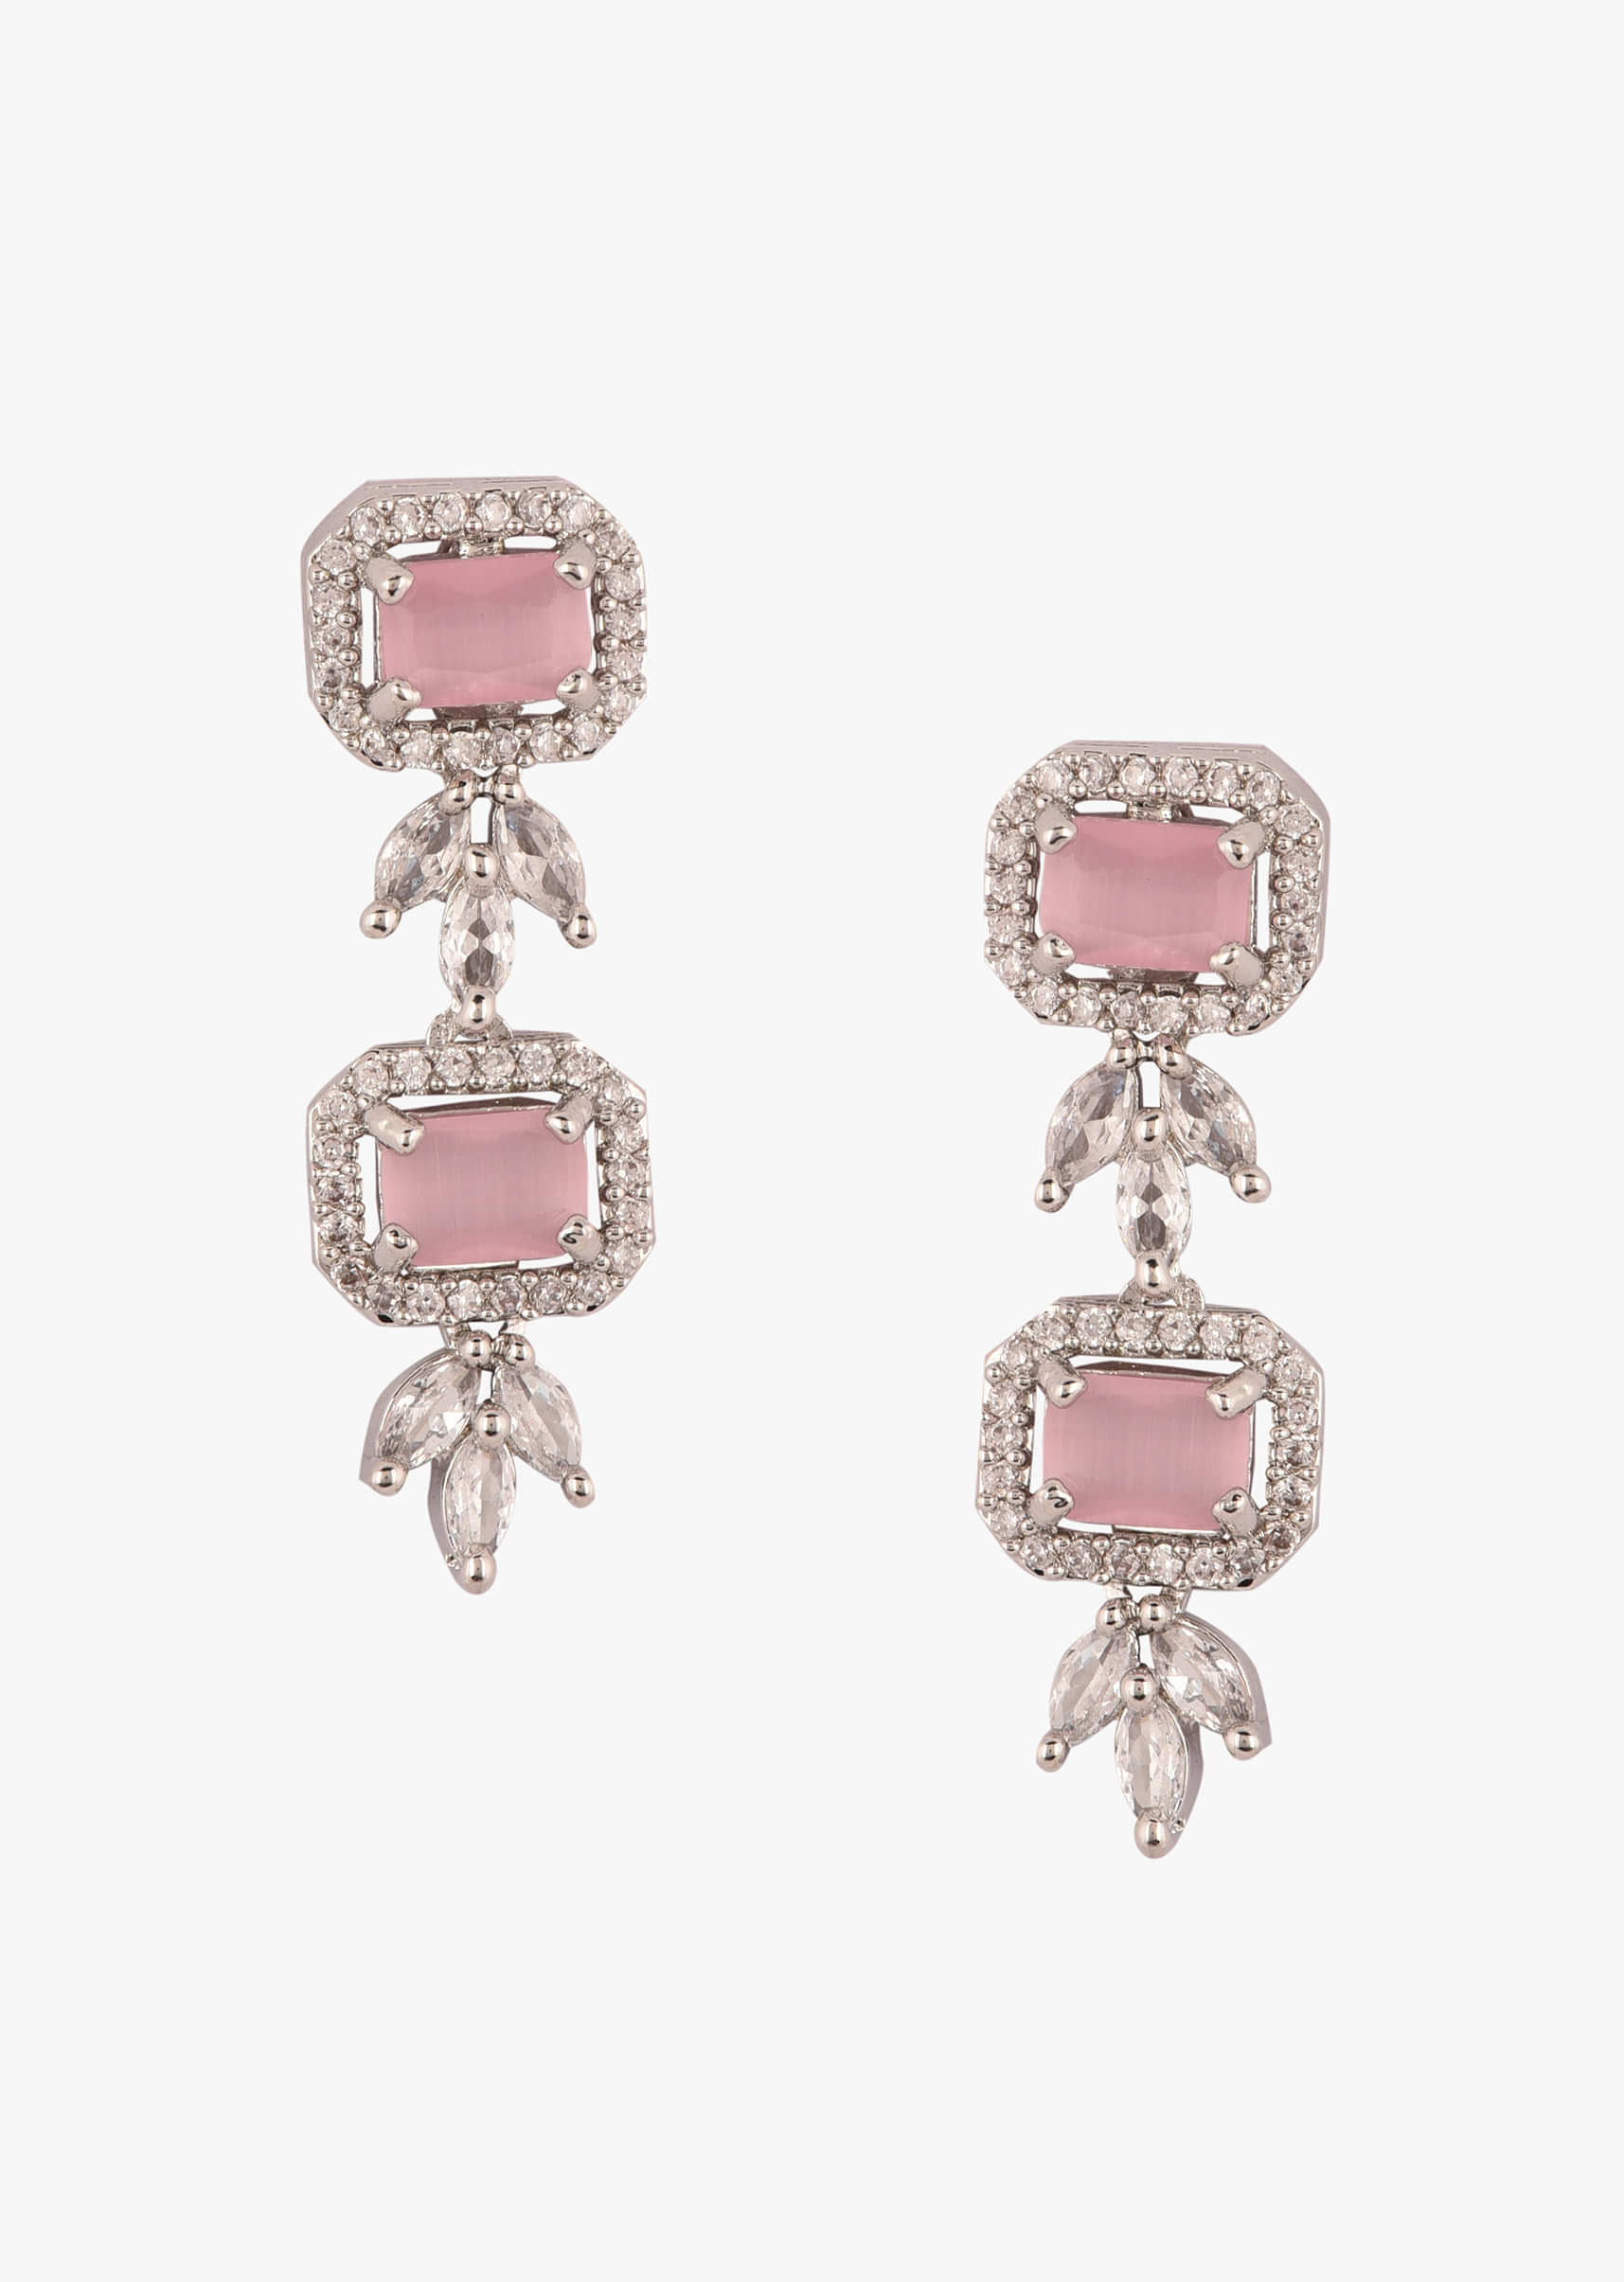 Silver Plated Diamond Jewelry Set With Baby Pink Stones